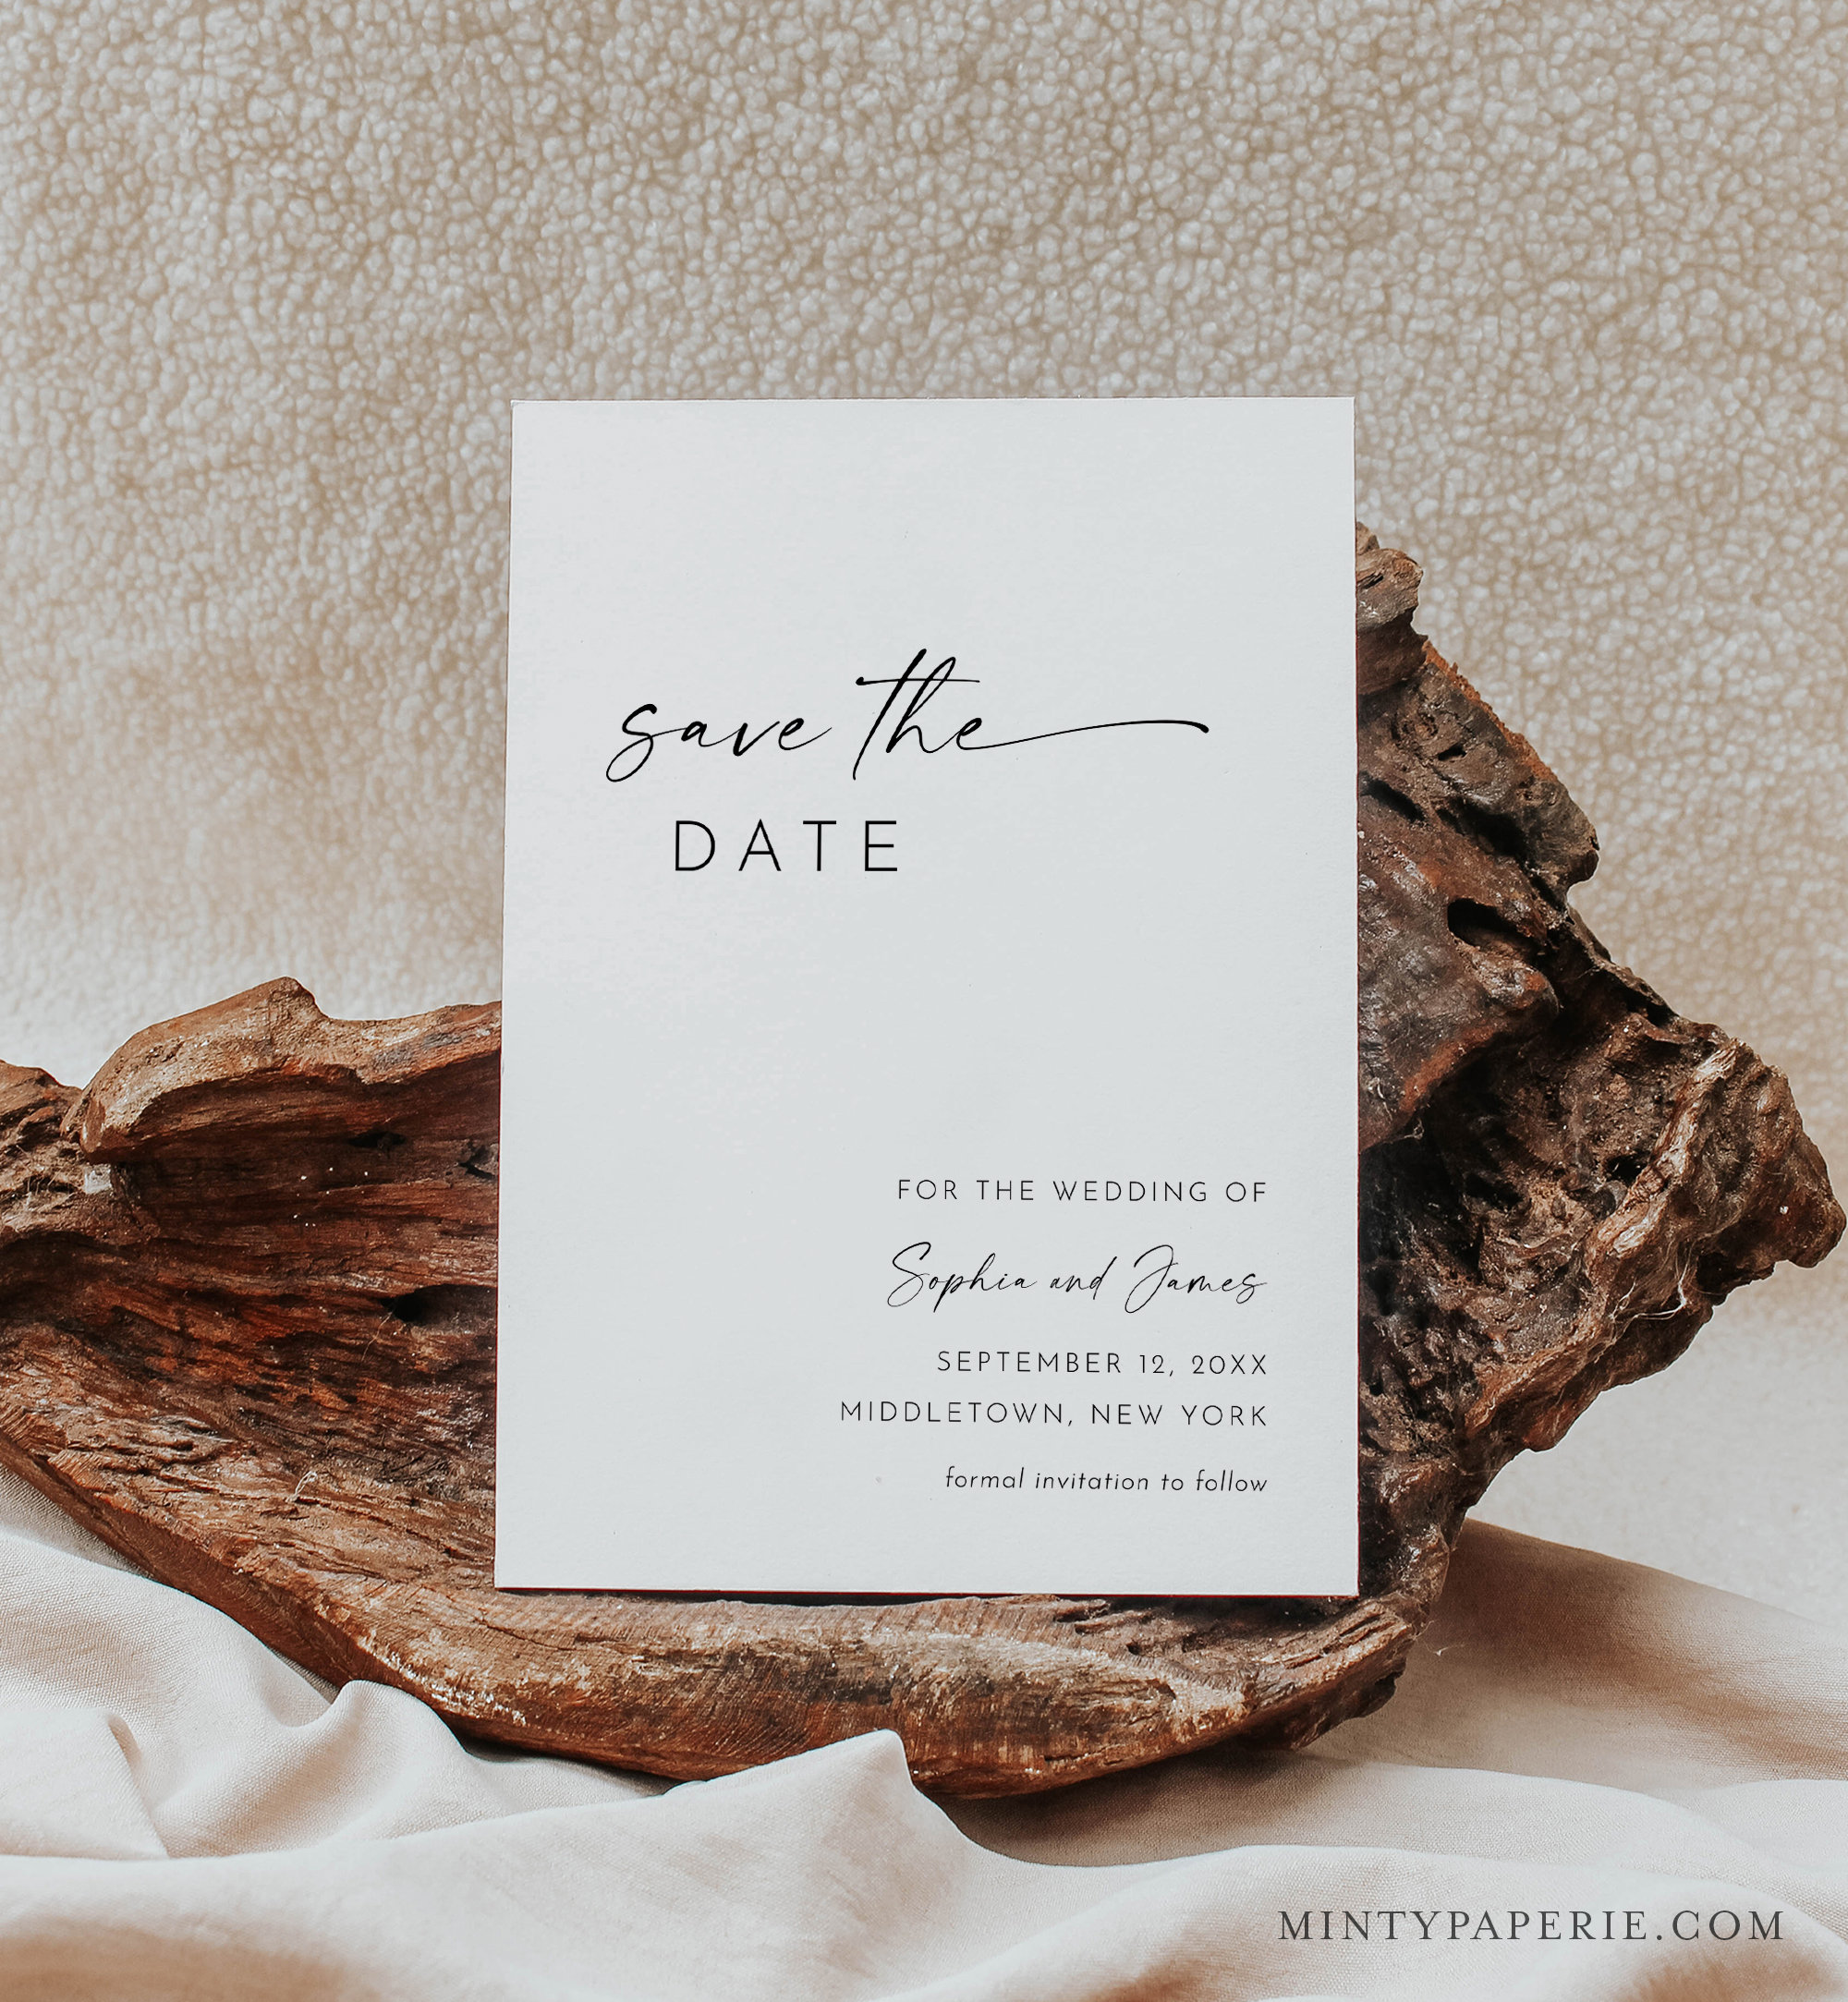 Budget Wedding Save the Date Cards & Templates